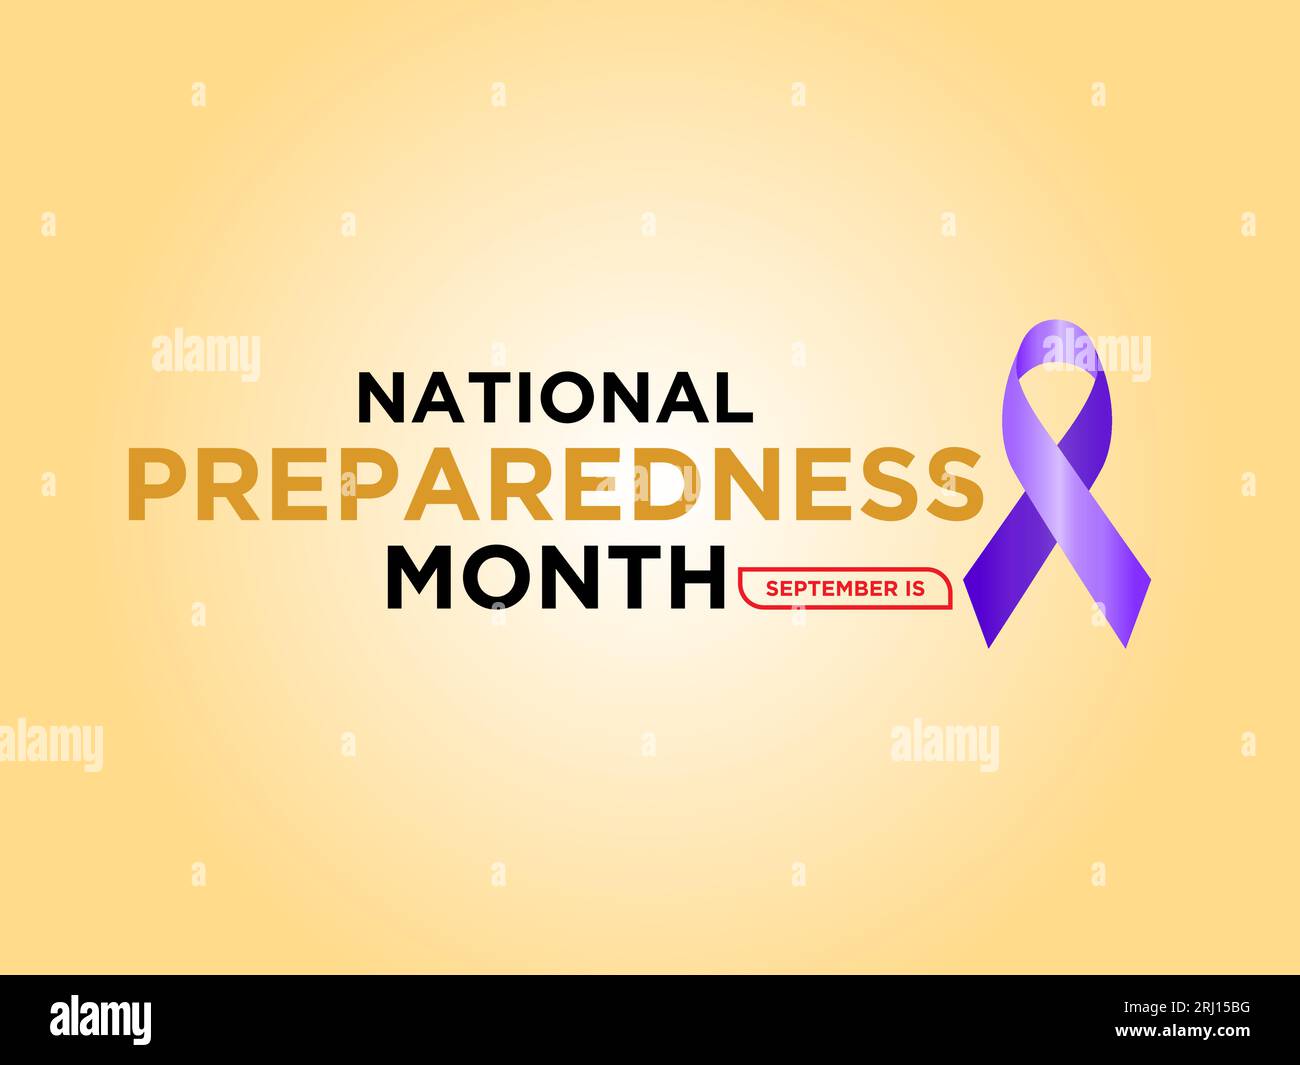 National Preparedness Month Promotes Readiness, Safety, and Collaboration for All Hazards. vector illustration banner template. Stock Vector